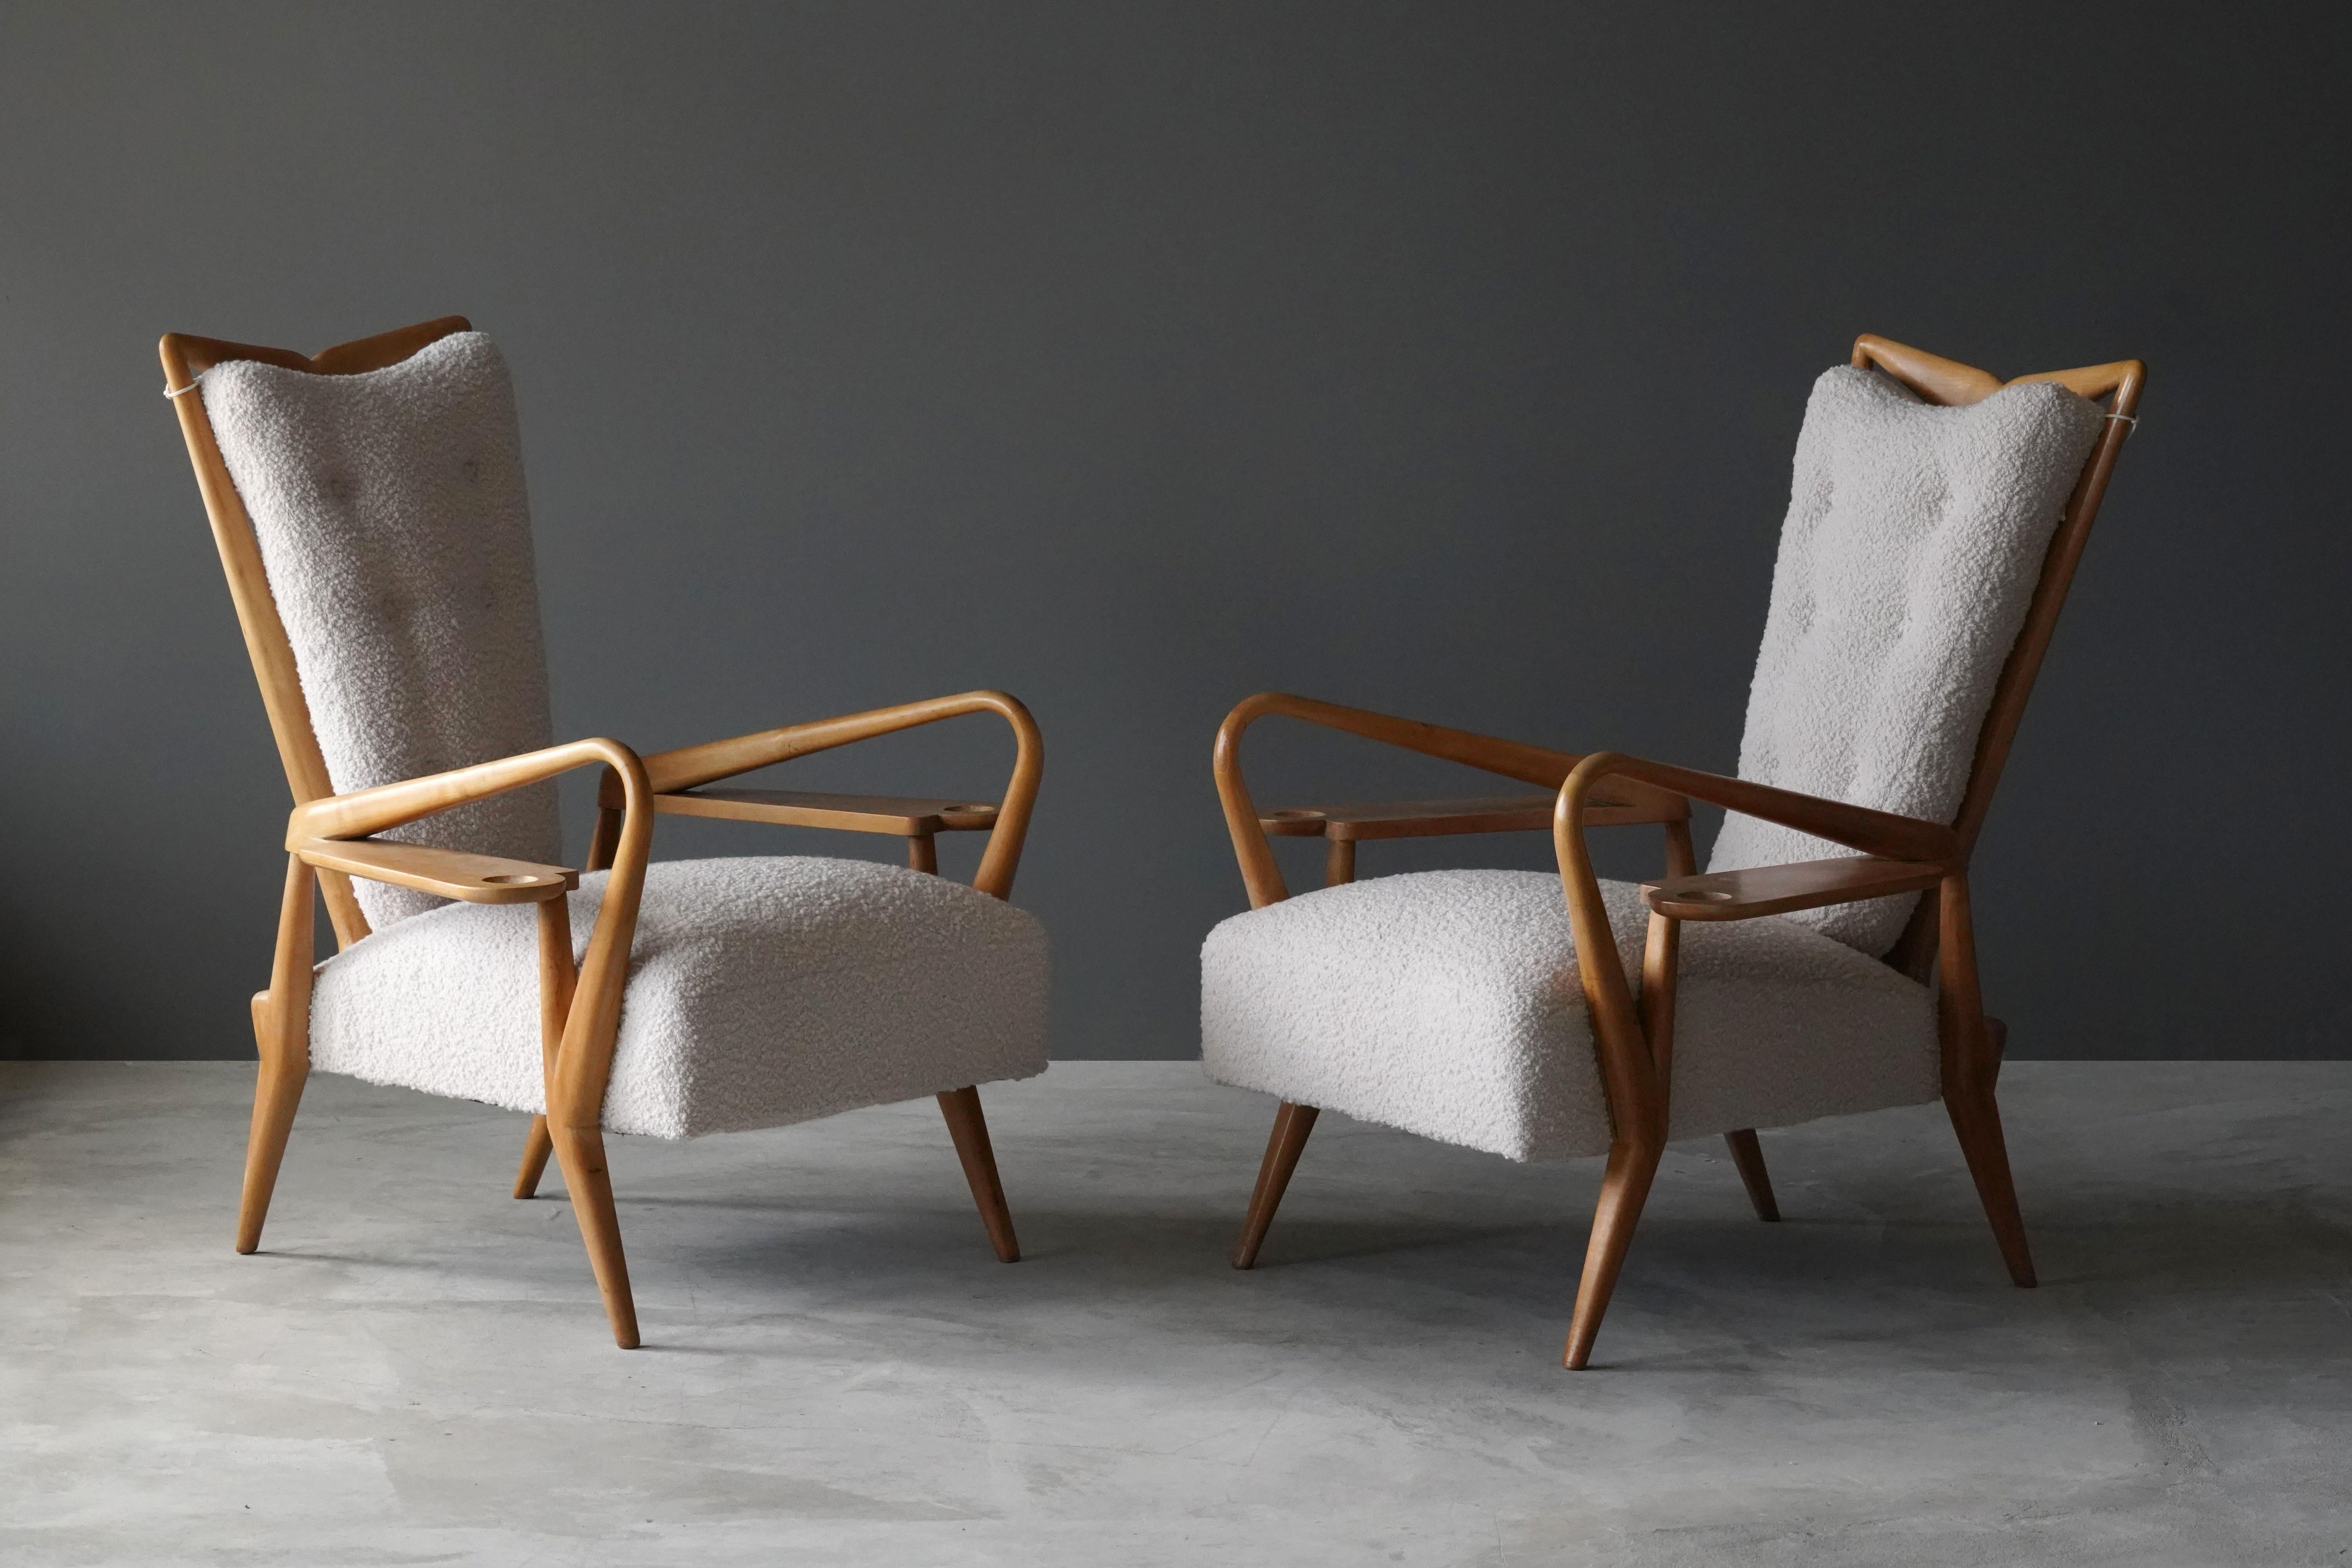 A pair of highly modernist and organic lounge chairs / highback chairs in finely carved maple, reupholstered in off white bouclé. Design attributed to Giordano Forti. Produced in Italy in the 1940s. The design incorporates side tables built onto the